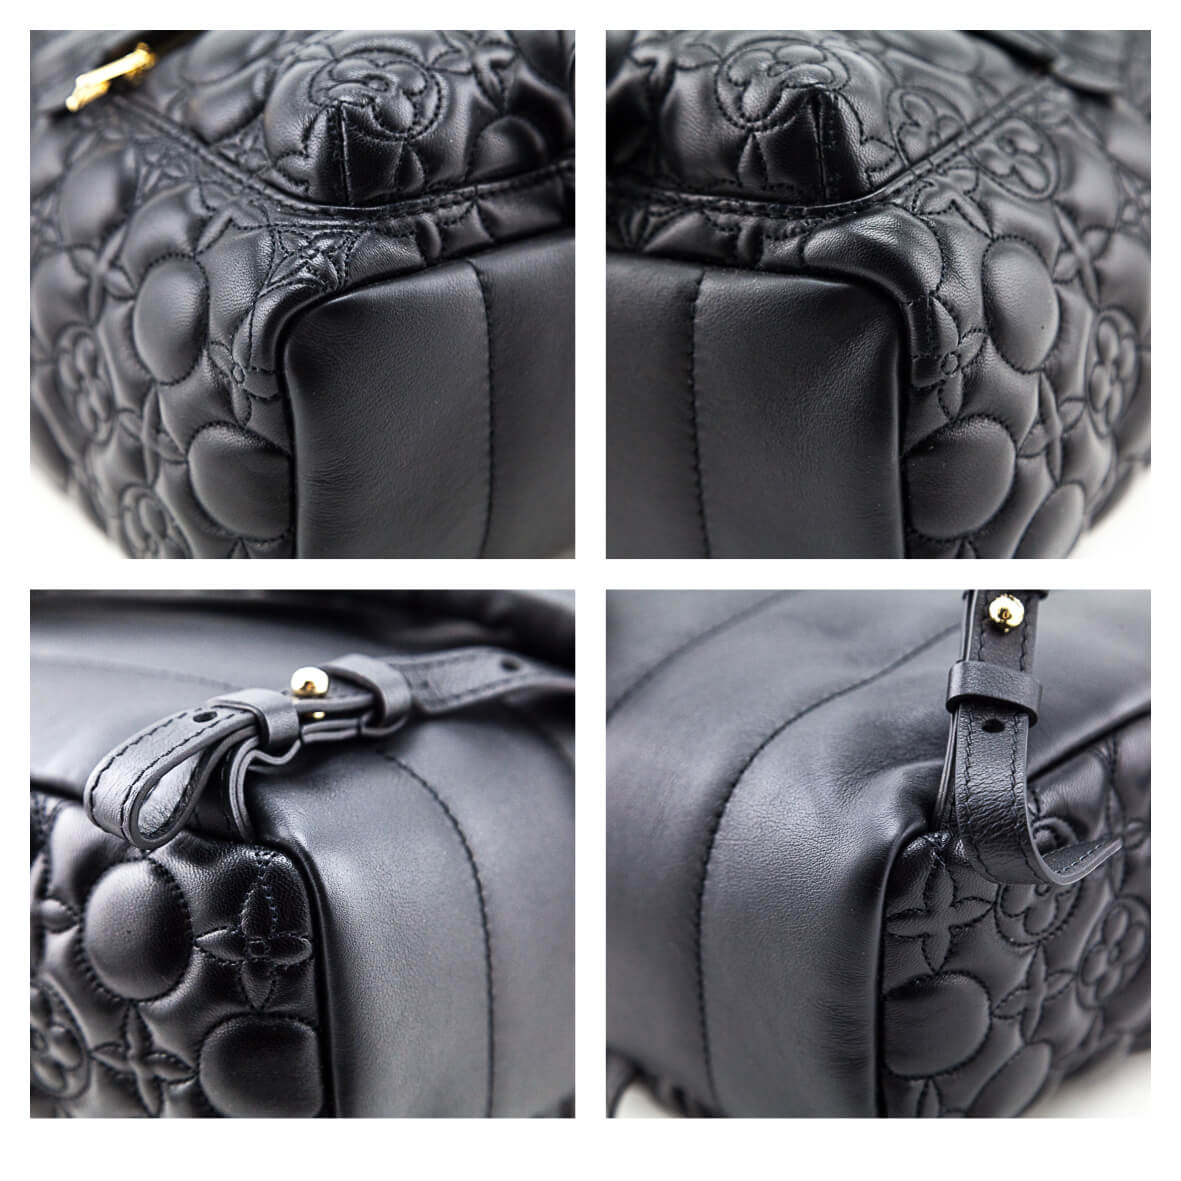 Louis Vuitton Black Lambskin Malletage Flower Palm Springs PM - Love that Bag etc - Preowned Authentic Designer Handbags & Preloved Fashions